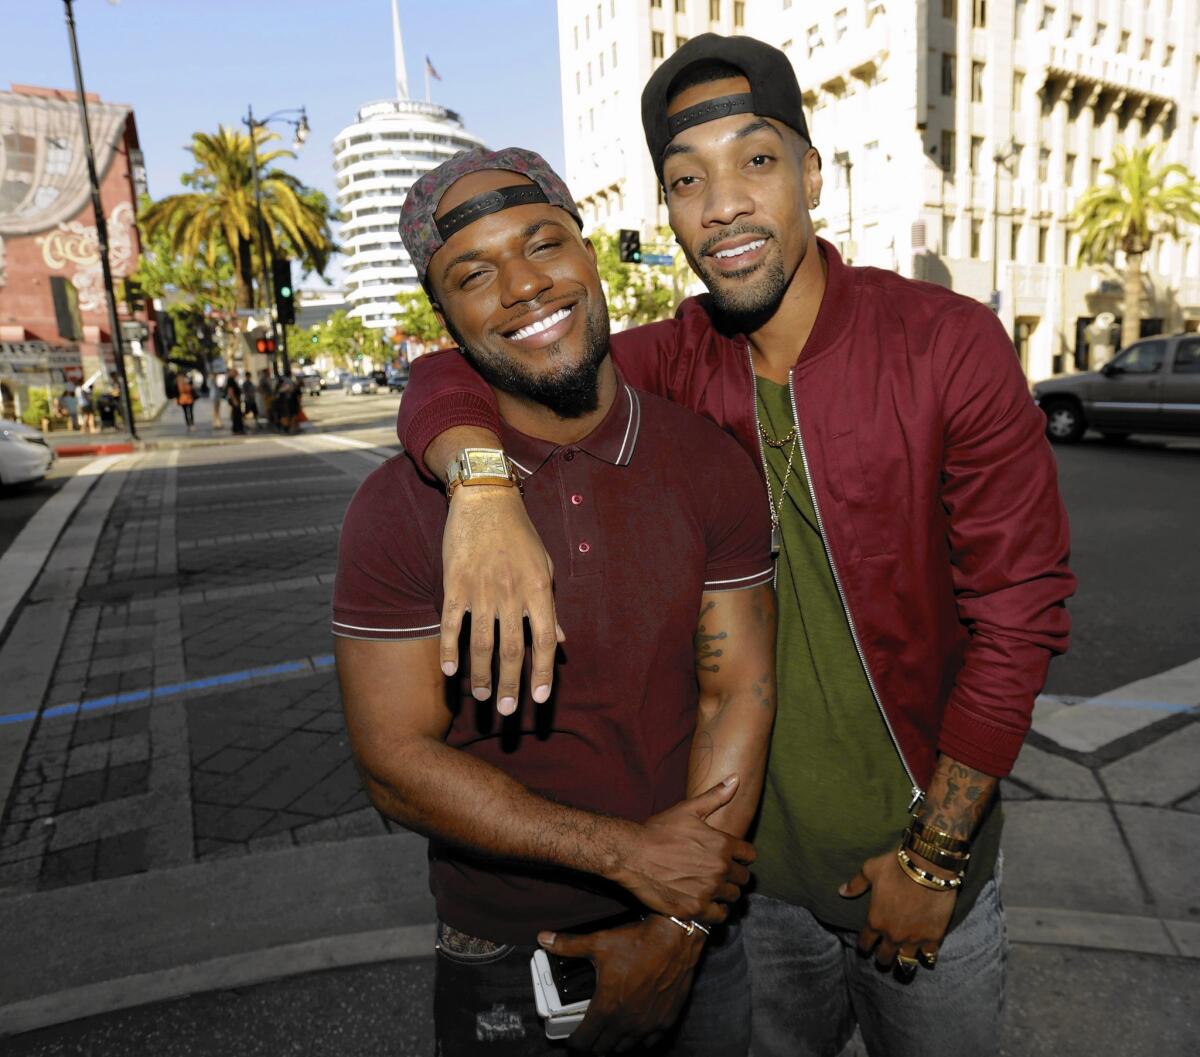 "Love & Hip Hop: Hollywood" personalities Milan Christopher, left, and Miles Brock are a couple in a music genre where gay slurs have been prevalent.